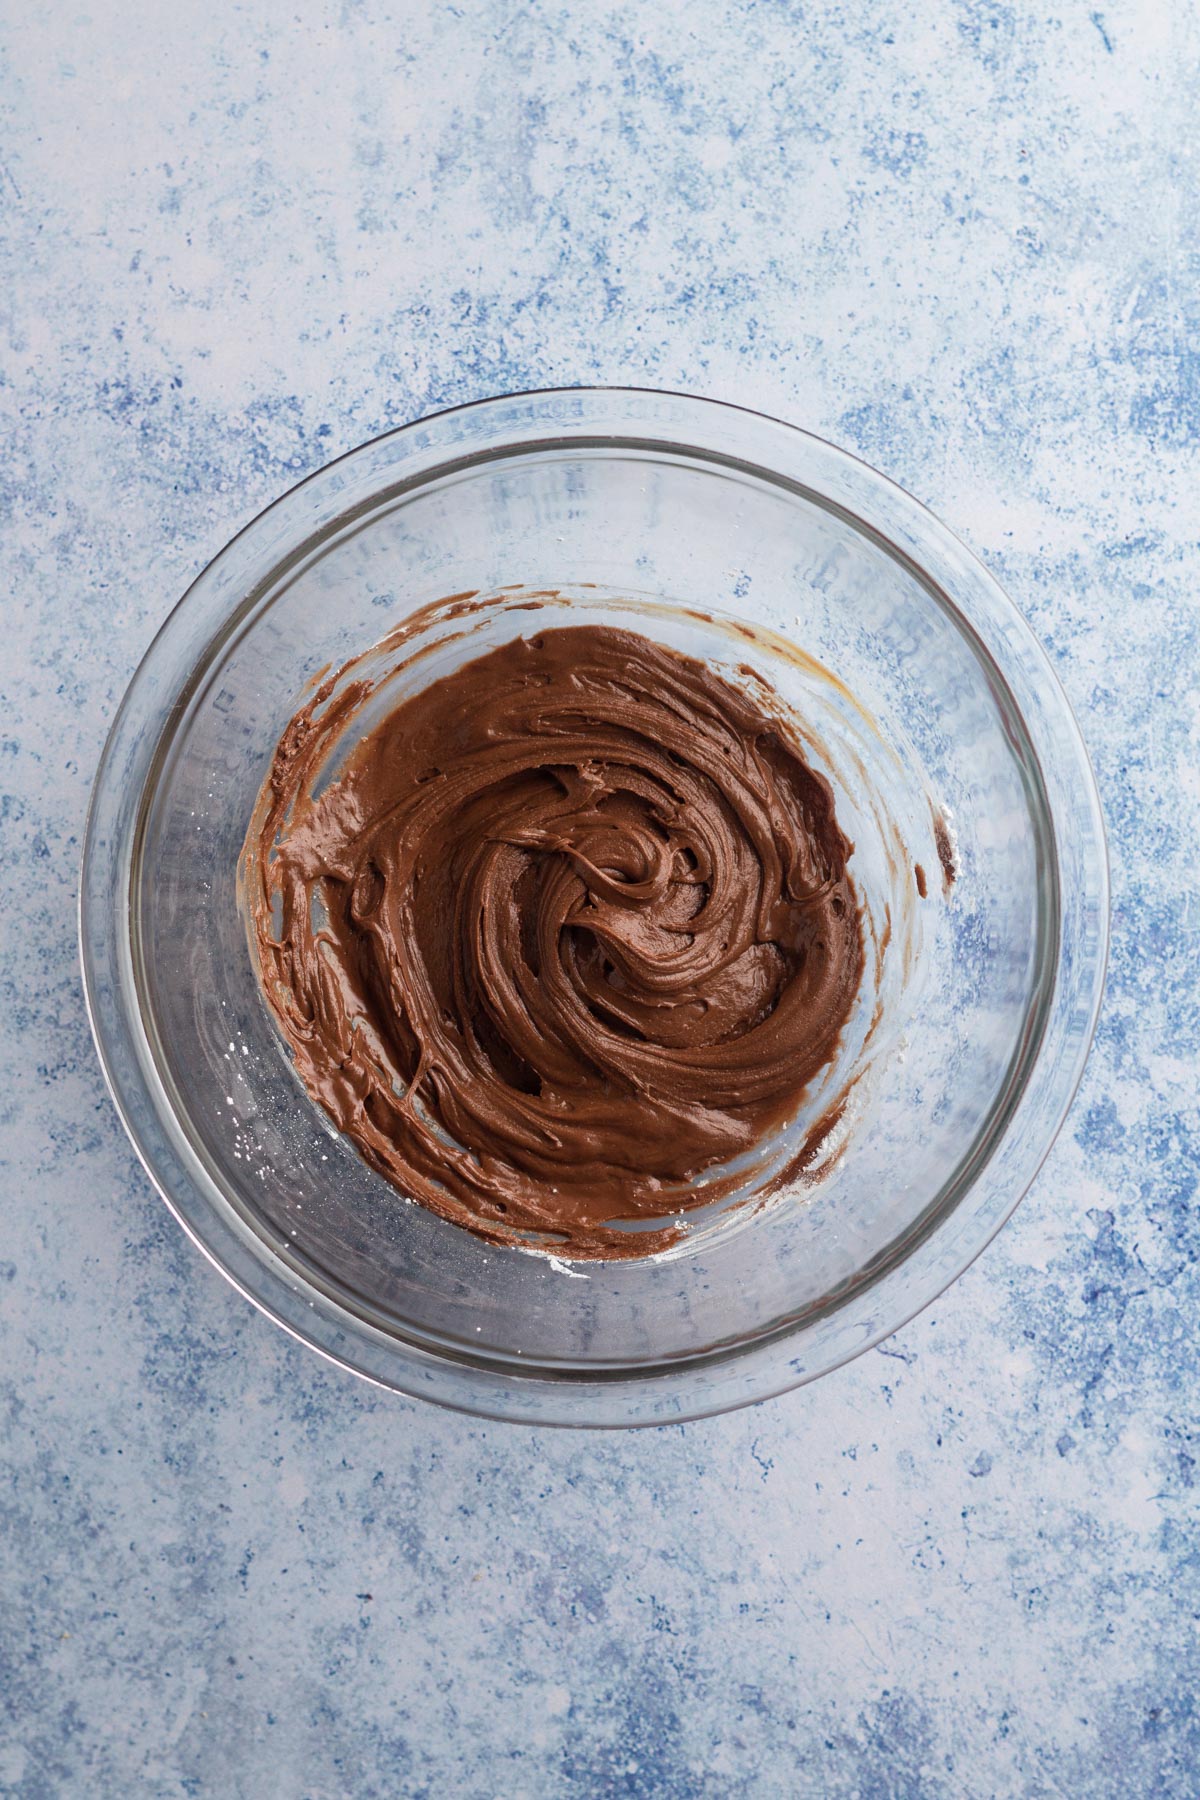 Chocolate filling in a glass bowl on a blue surface.